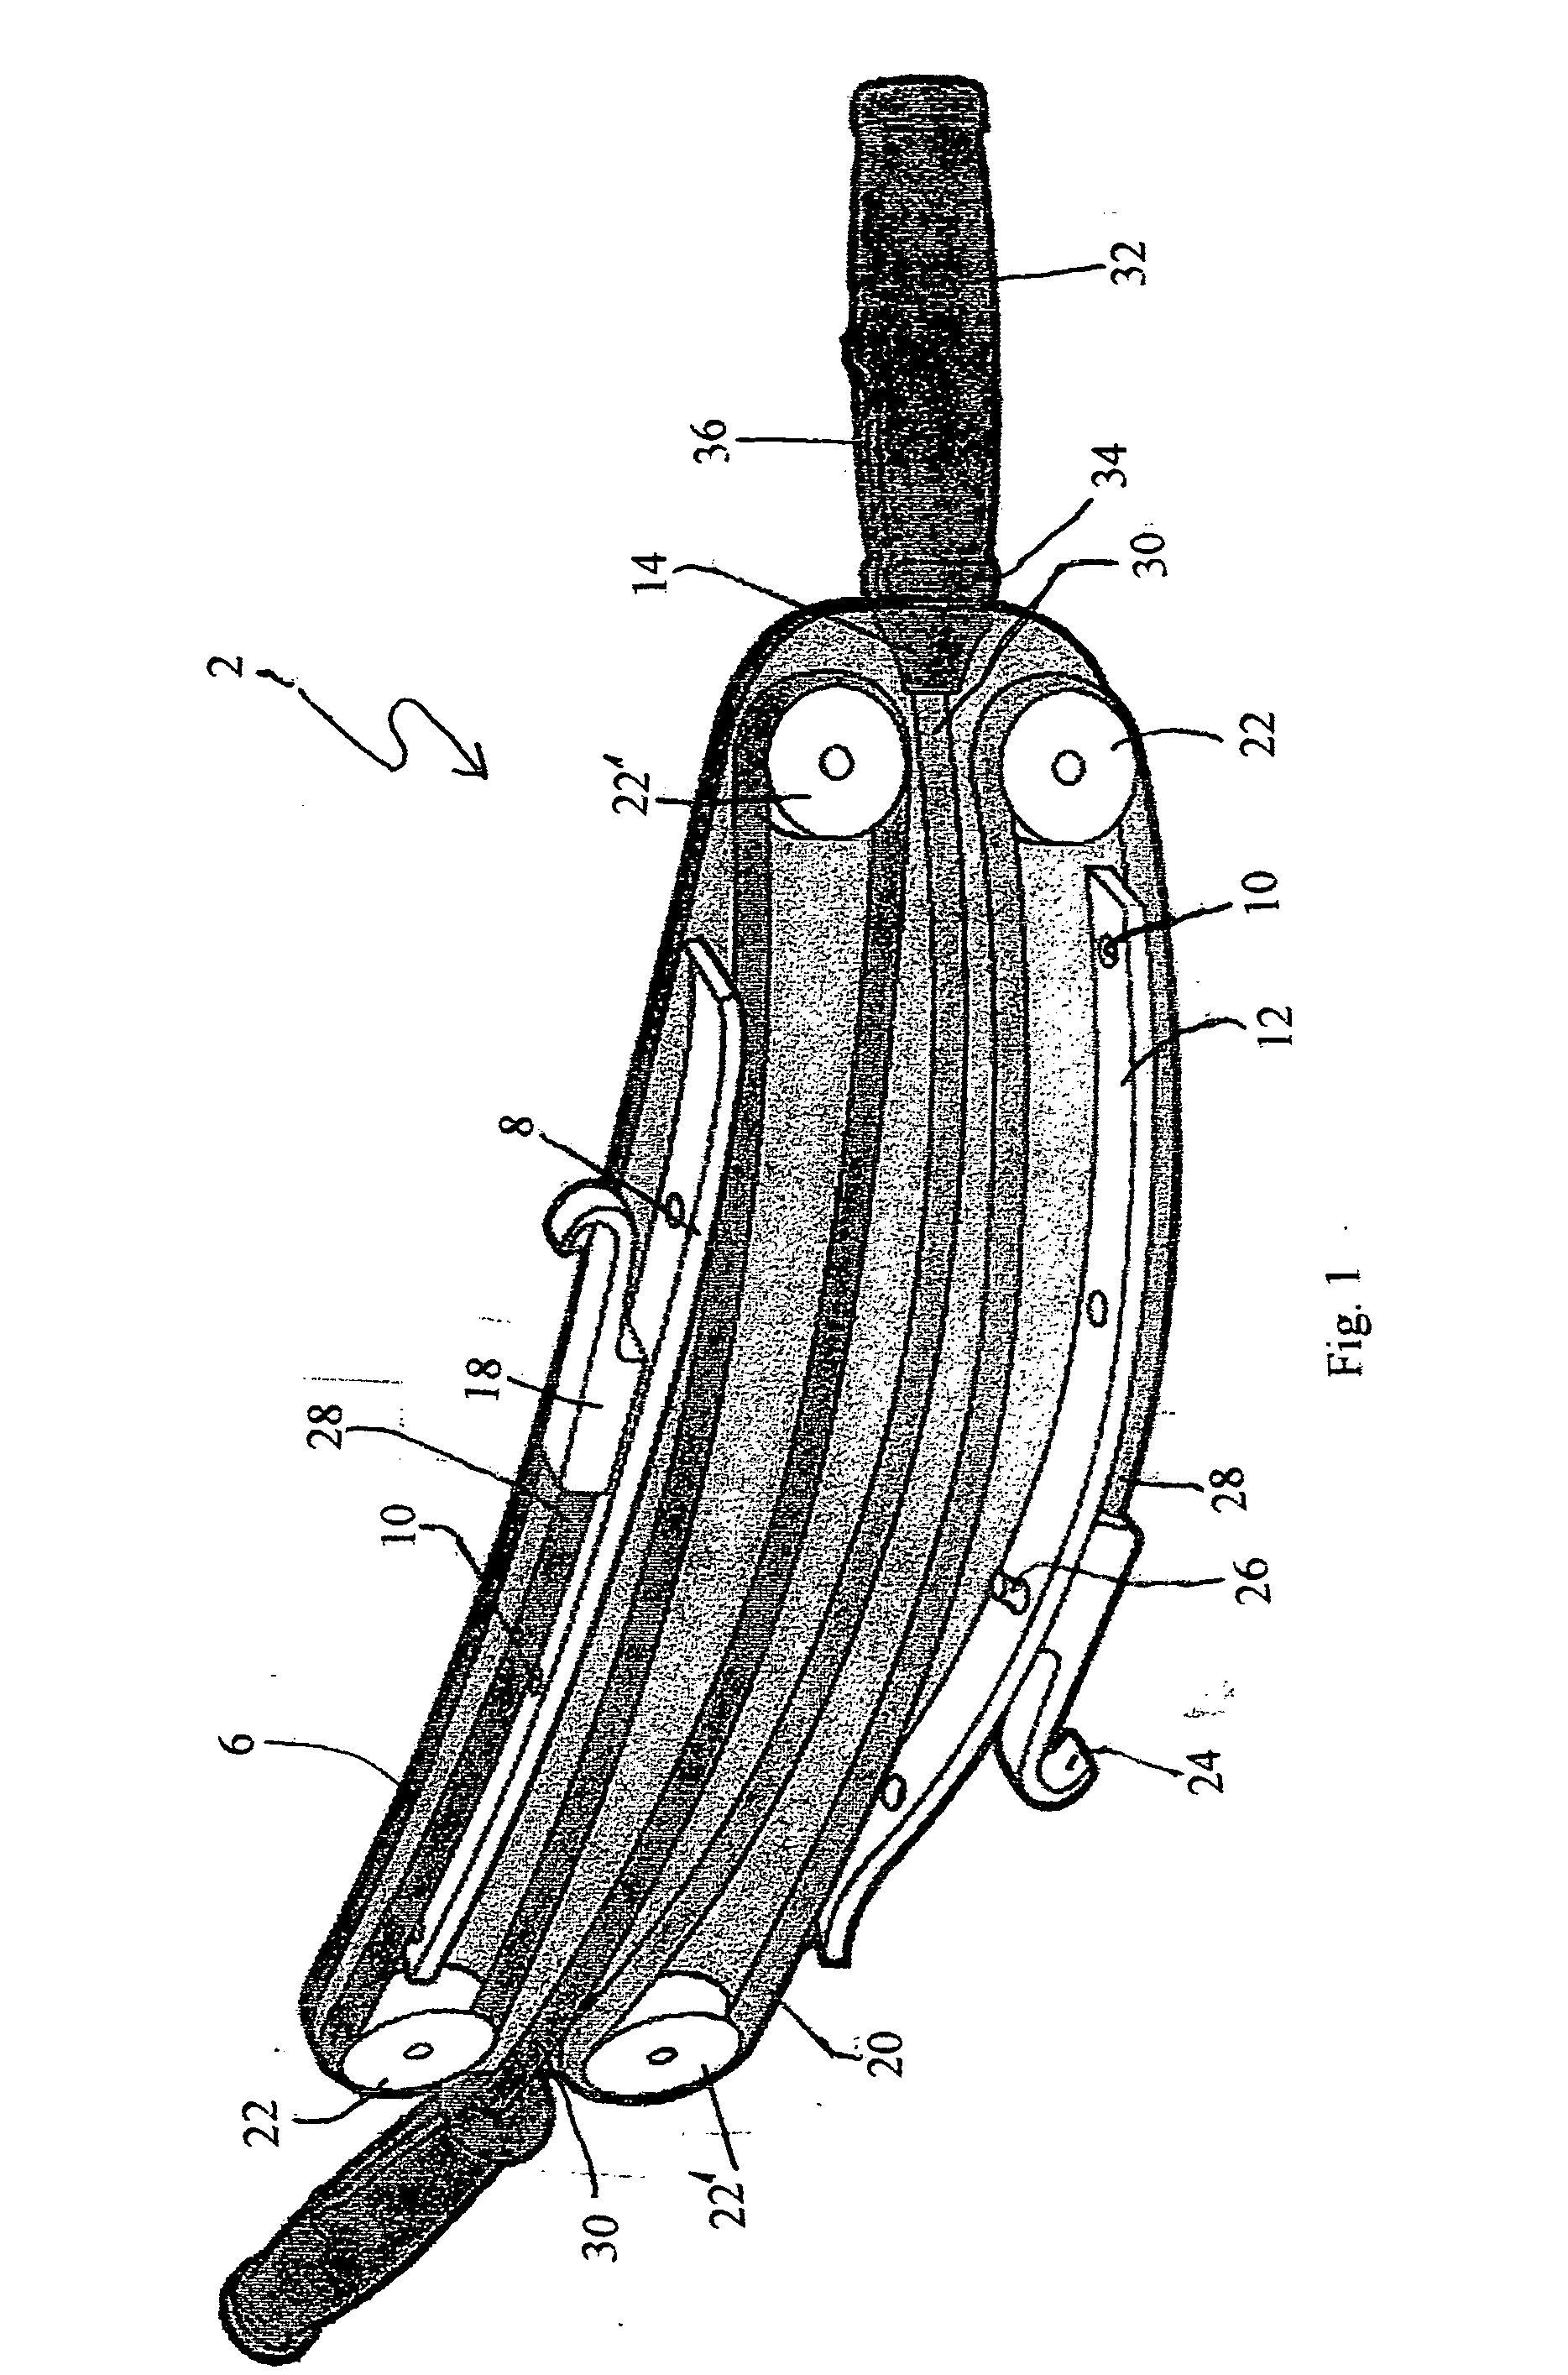 Multi-function exercise device